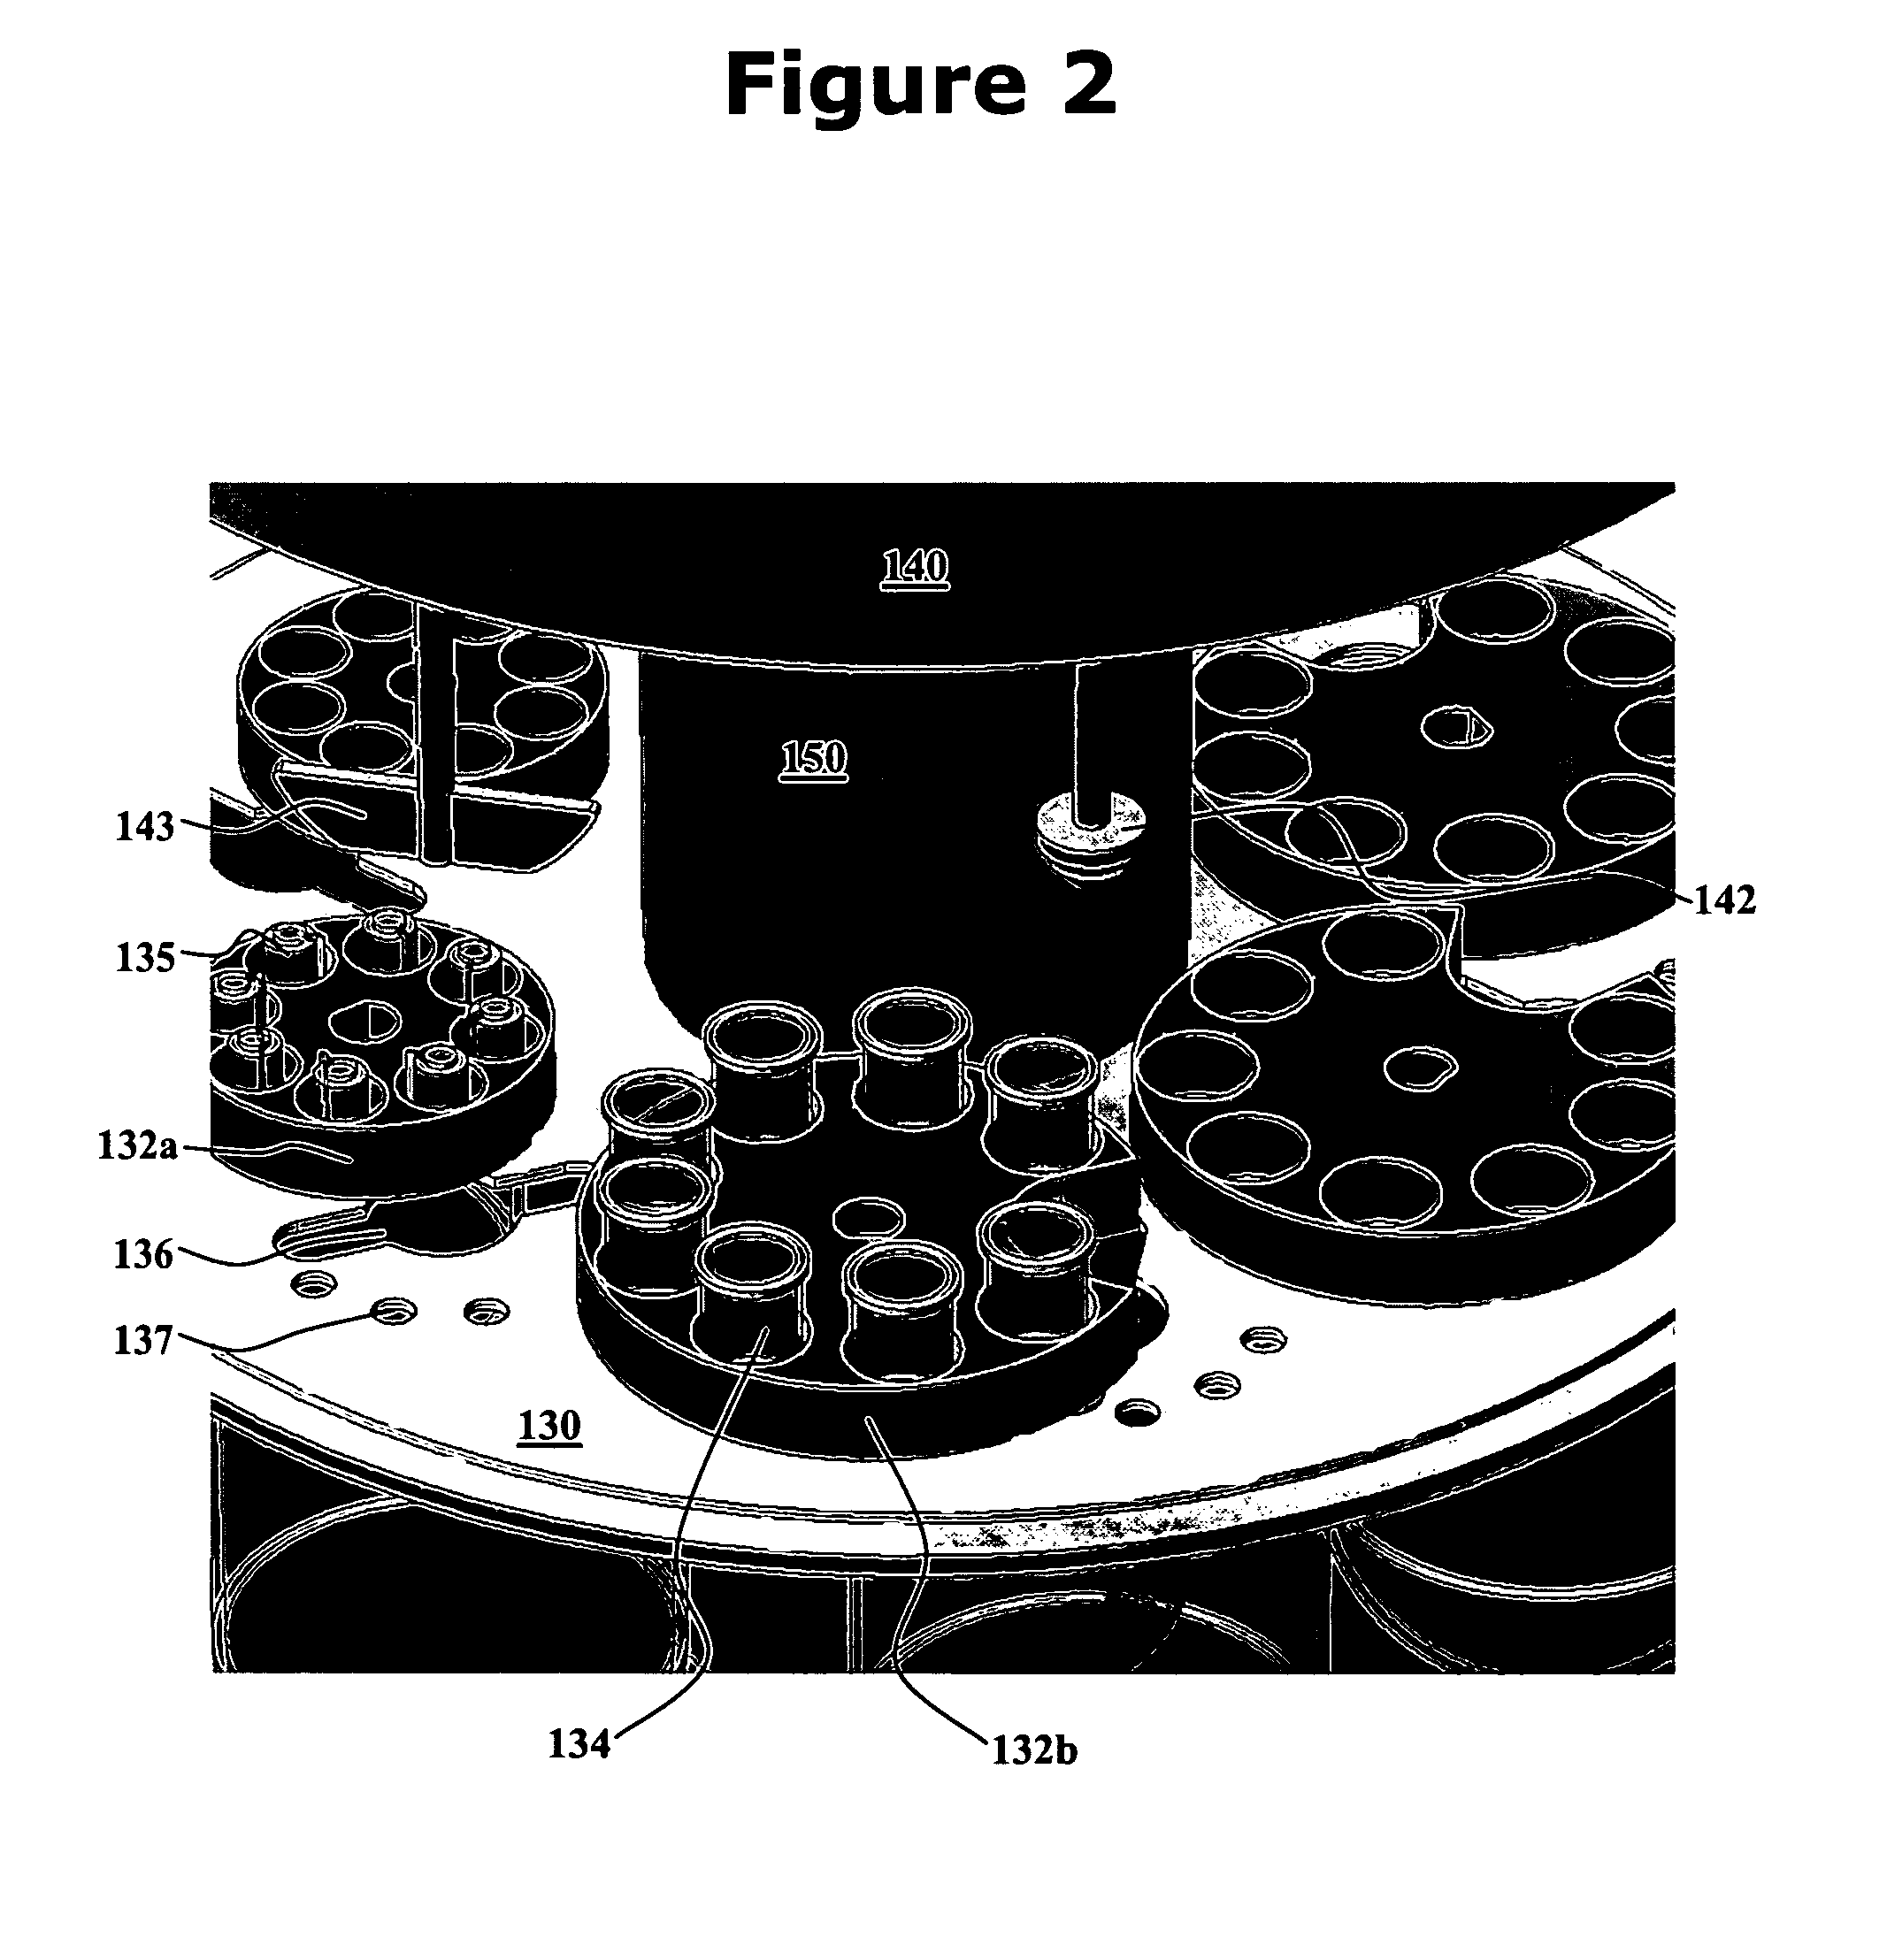 Integrated dissolution processing and sample transfer system